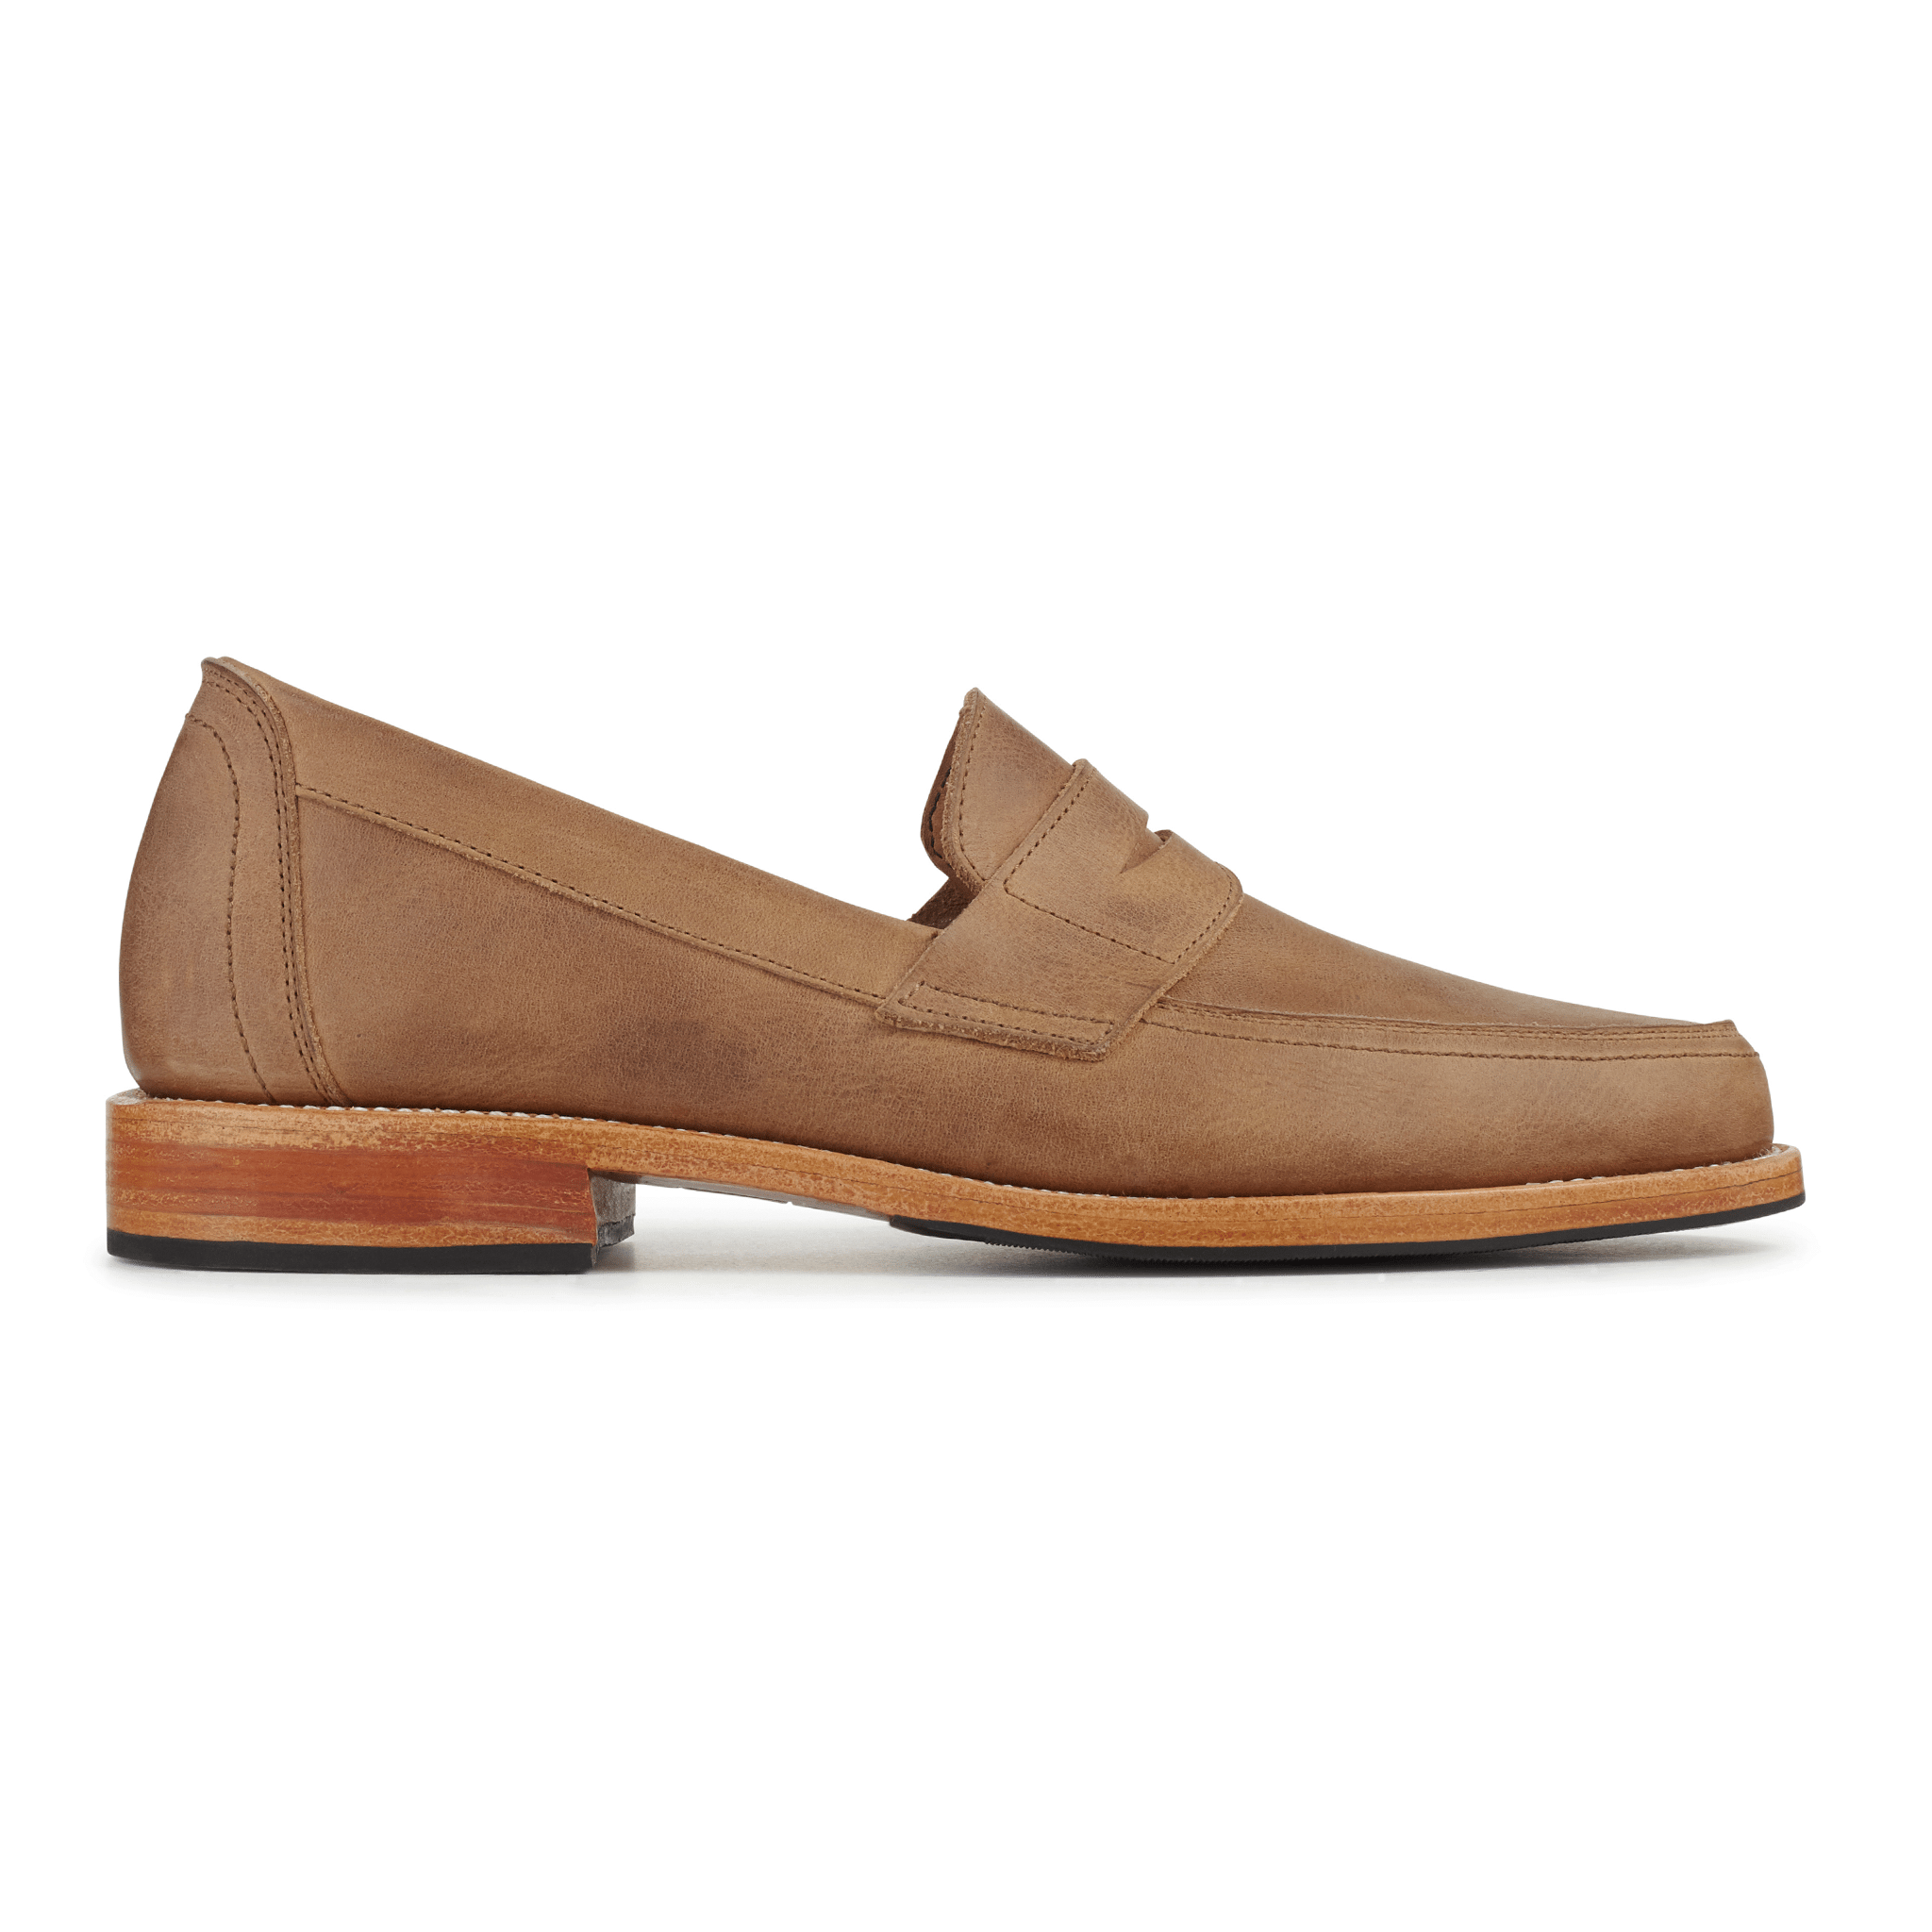 Adelante Made-to-Order Luca Leather Loafers, | Buy Me Once